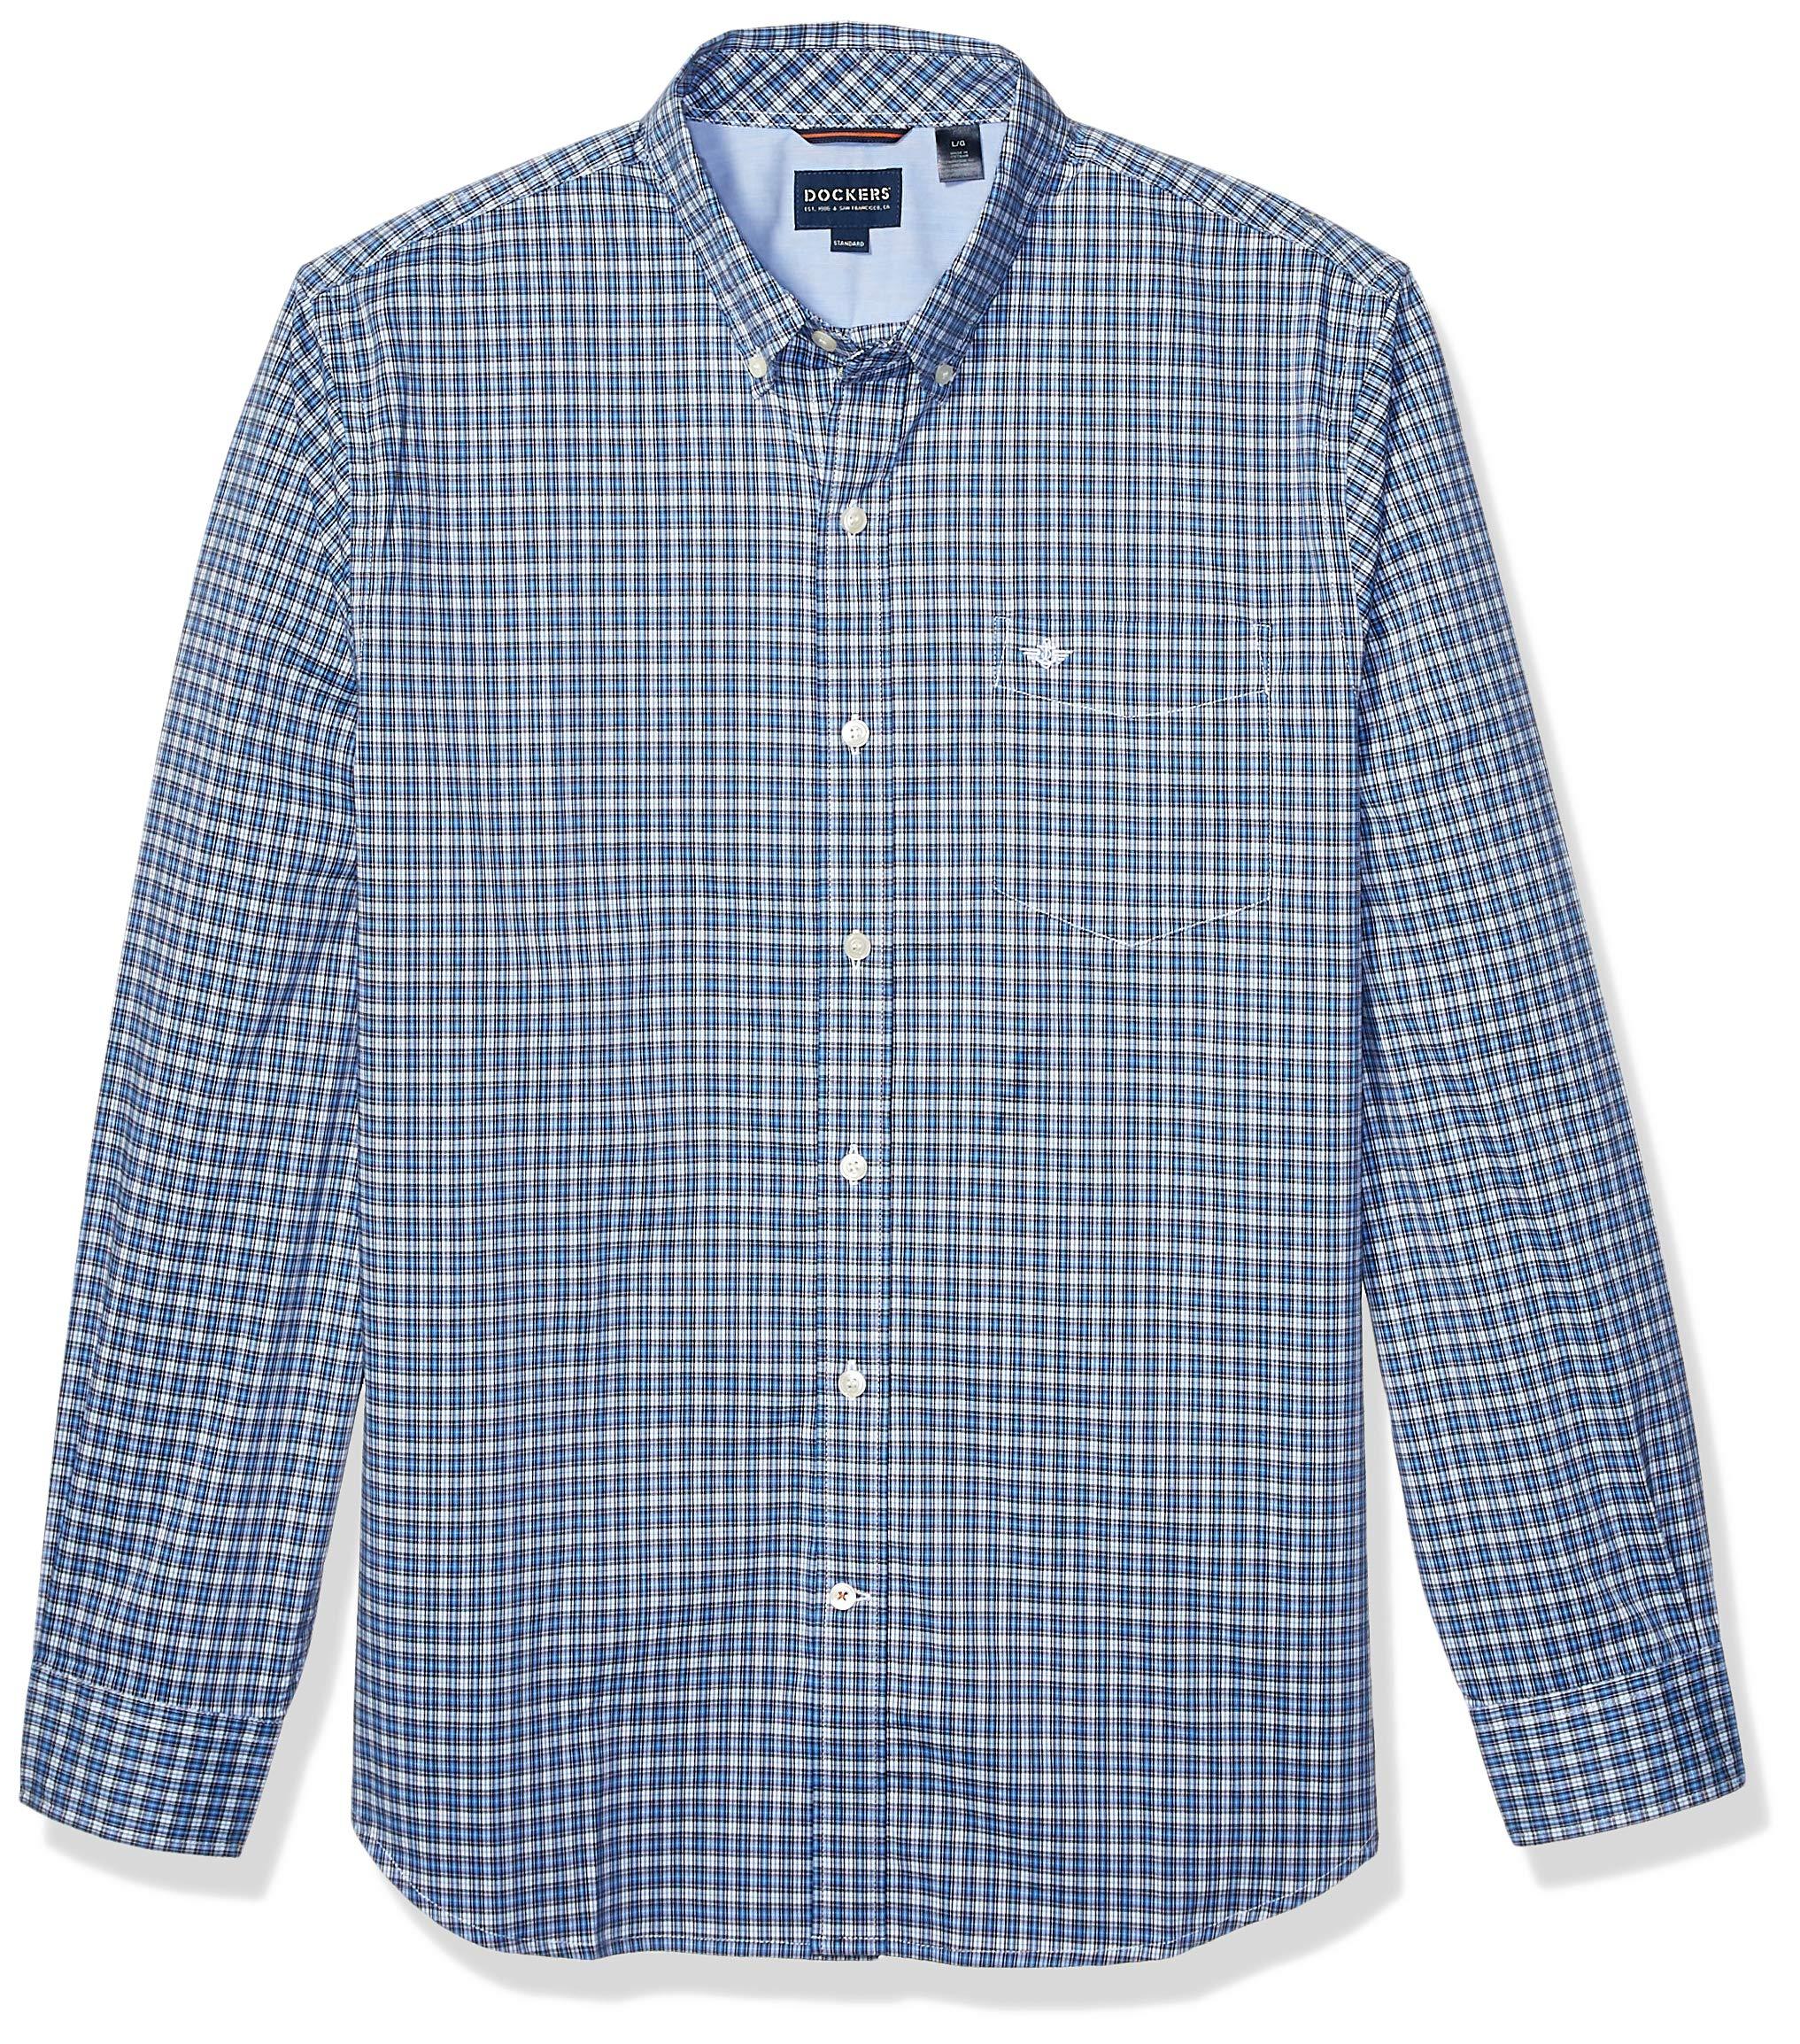 Dockers Long Sleeve Button Front Shirts in Blue for Men - Lyst